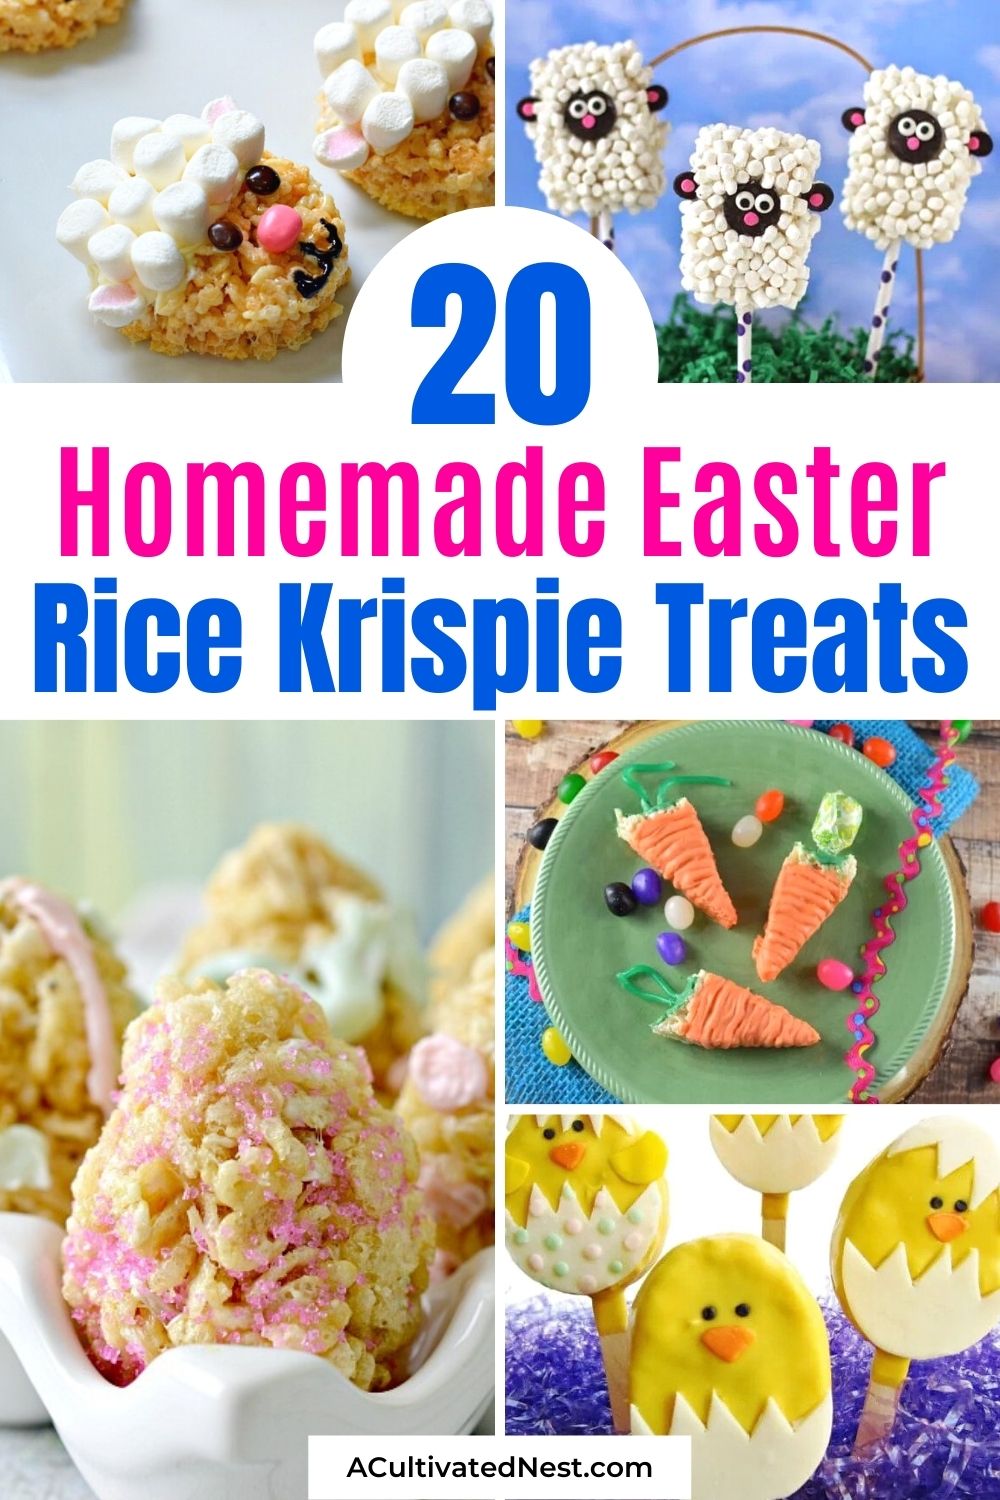 20 Tasty Easter Rice Krispie Treats- If you want toms new treats to enjoy this Easter, serve some fun, colorful, and delicious homemade Easter Rice Krispie Treats! There are so many fun recipes to try! | #EasterDesserts #desserts #Easter #riceKrispieTreats #ACultivatedNest